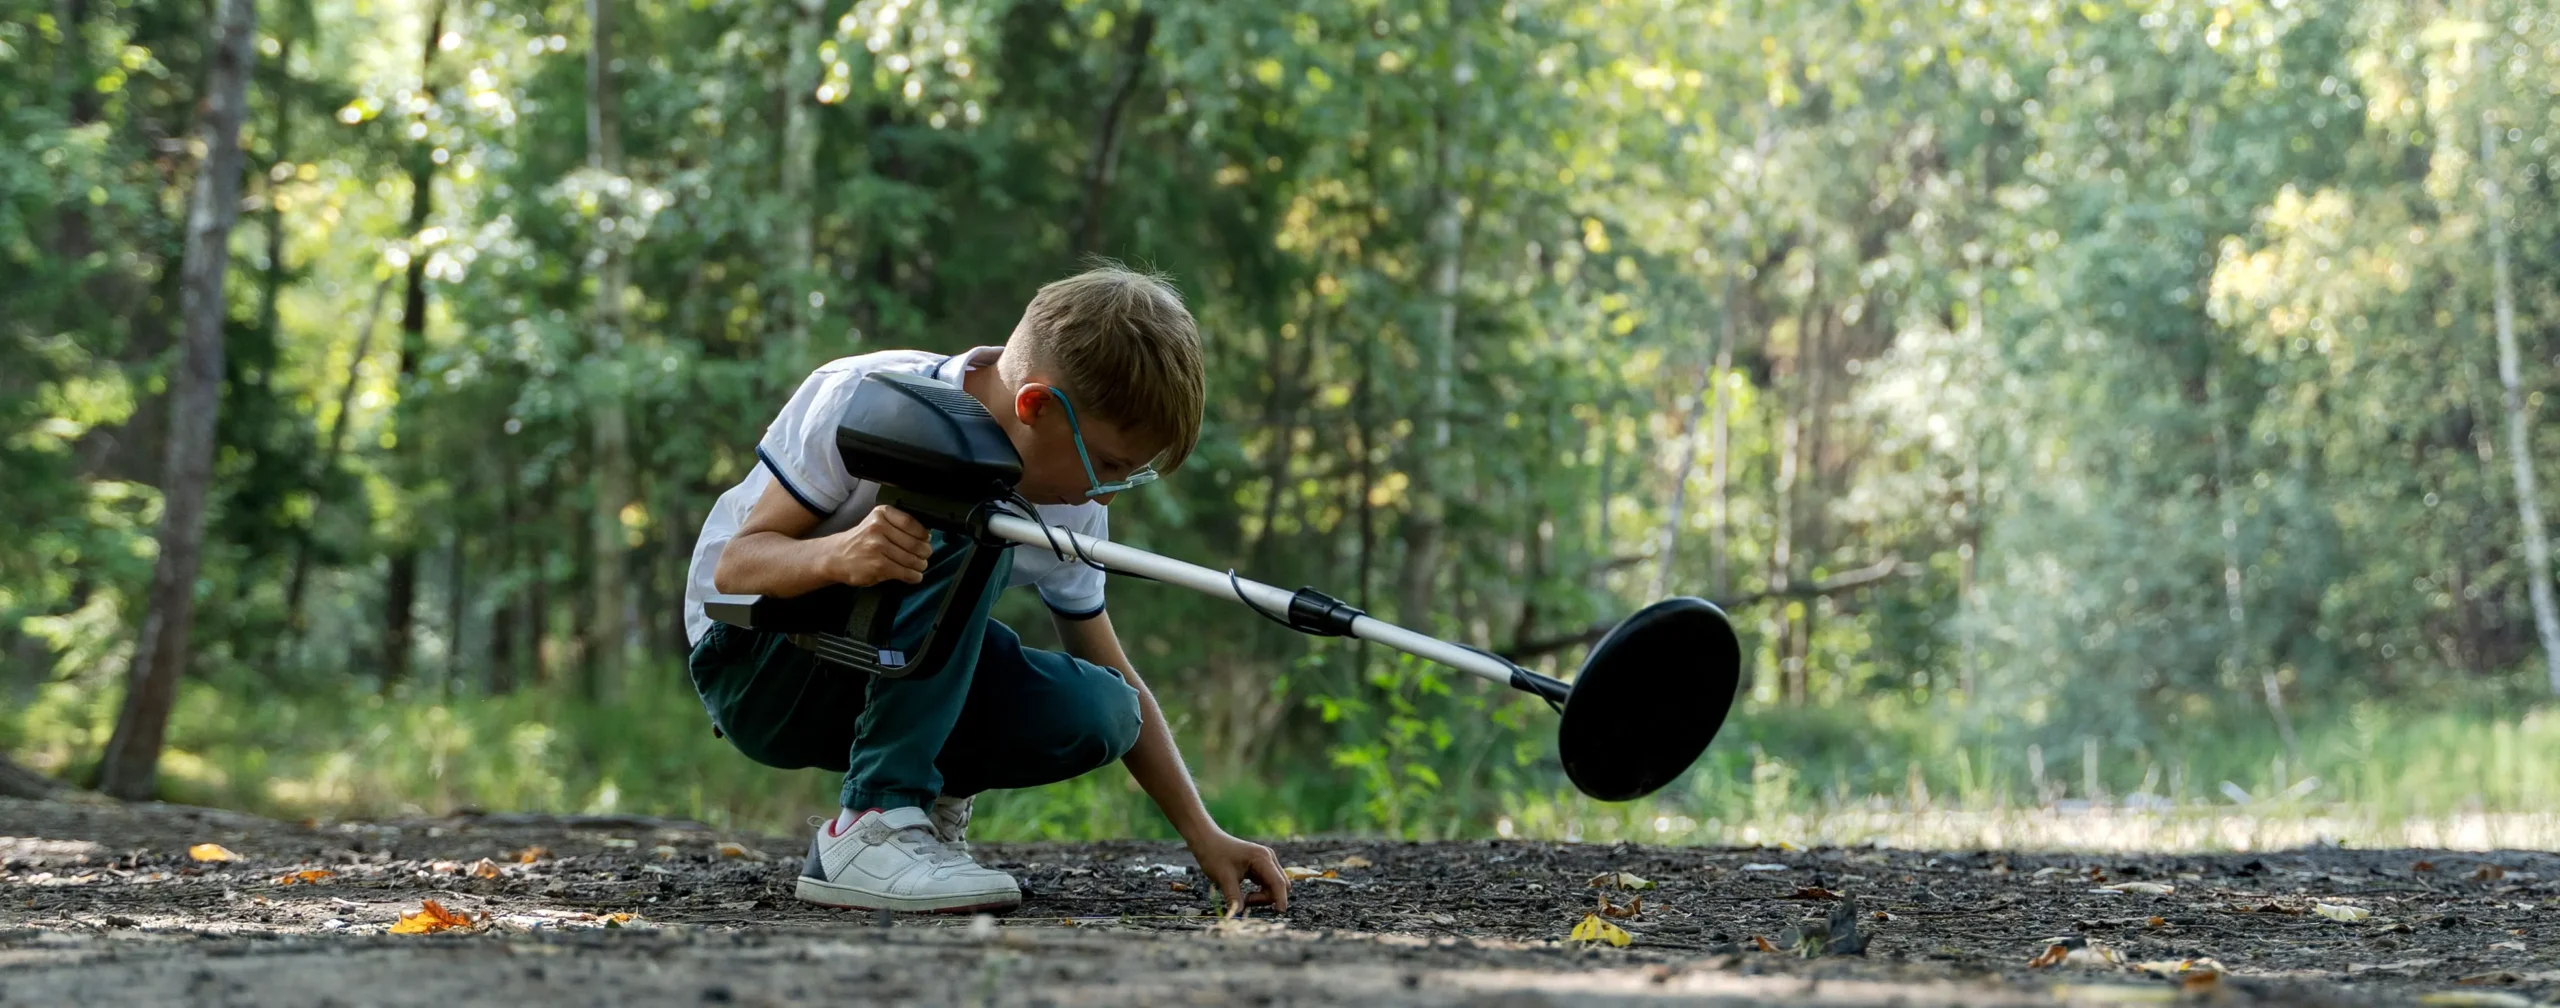 A young boy inspects the forest floor while metal detecting for buried precious metals